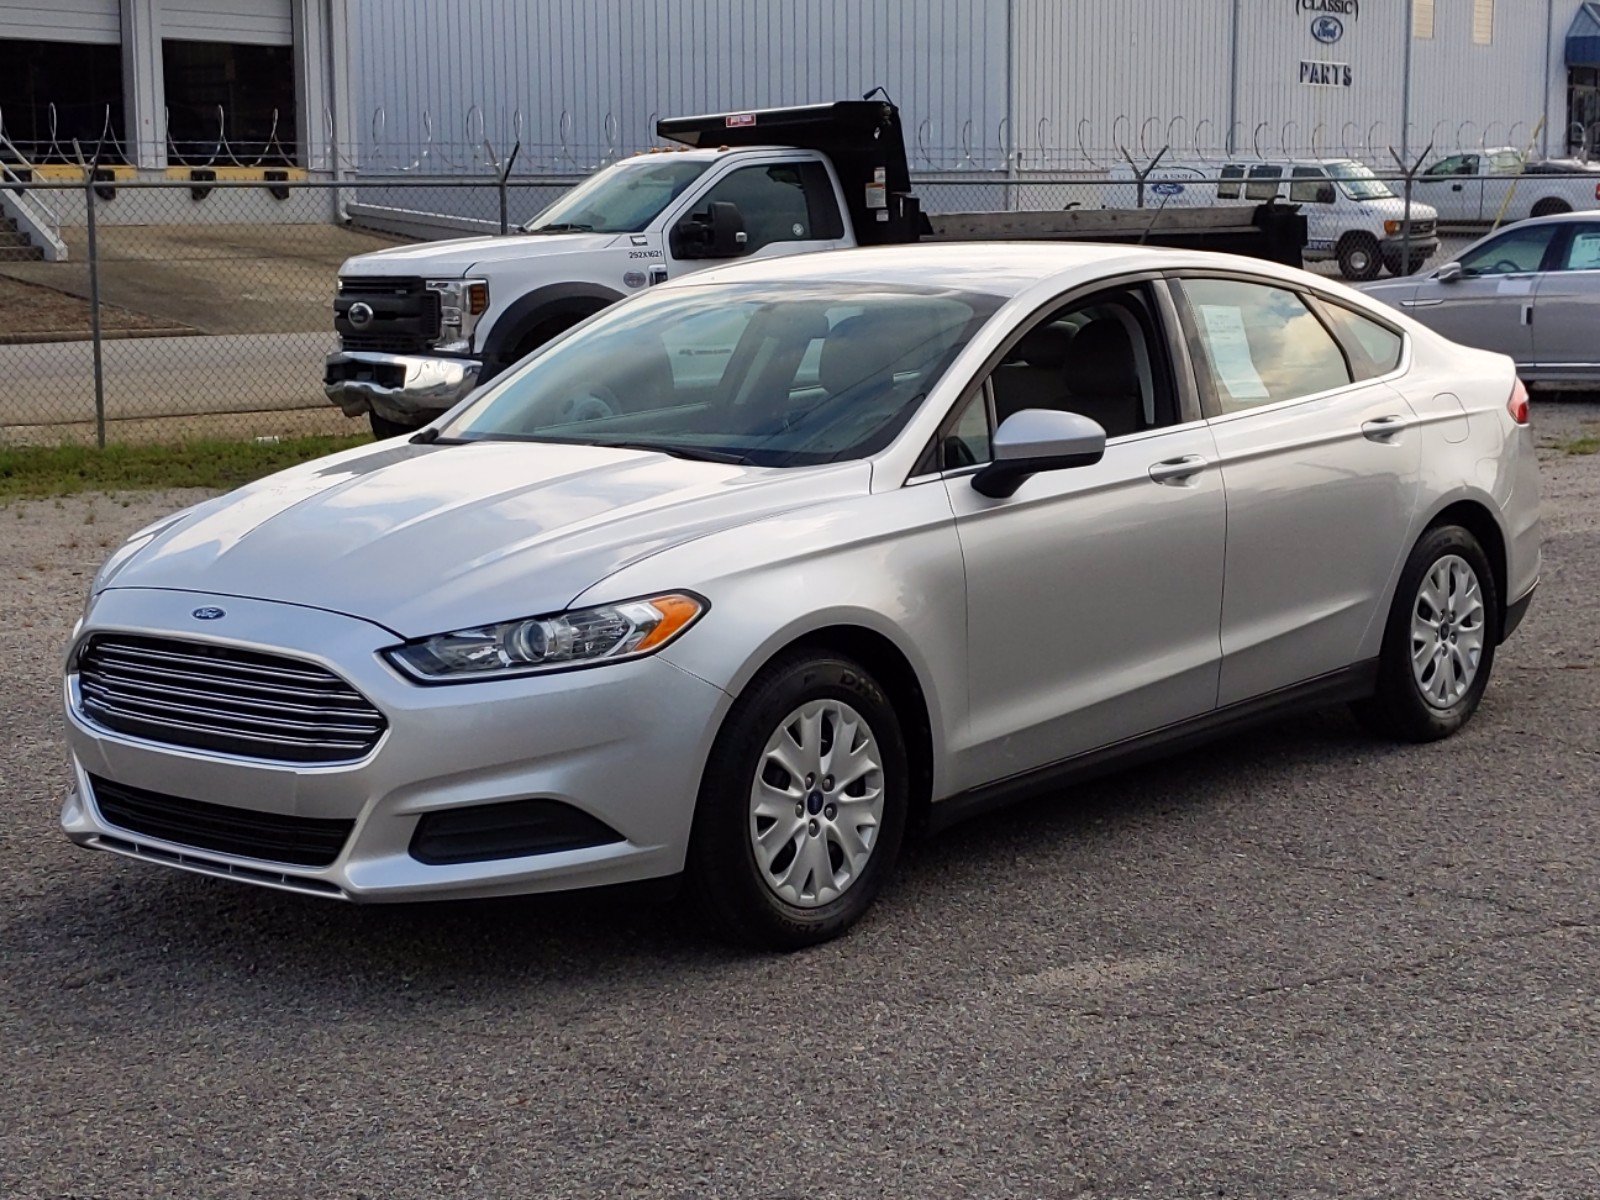 Pre-Owned 2013 Ford Fusion S FWD 4dr Car